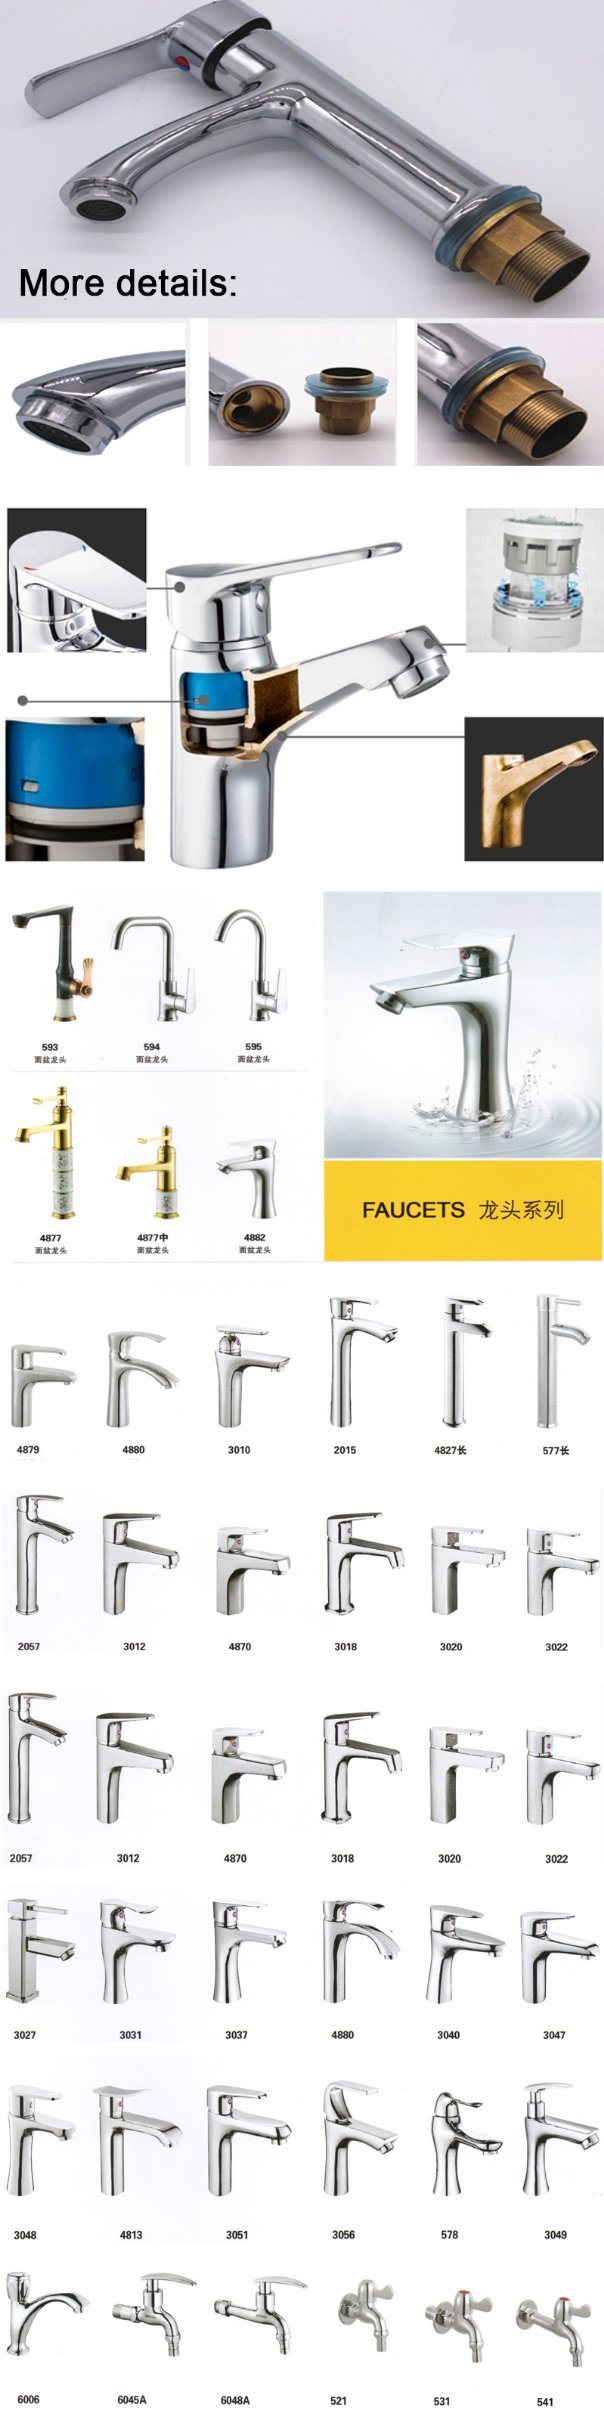 Hot and Cold Single Hole Kitchen Tap Fashionable Basin Mixer Faucet